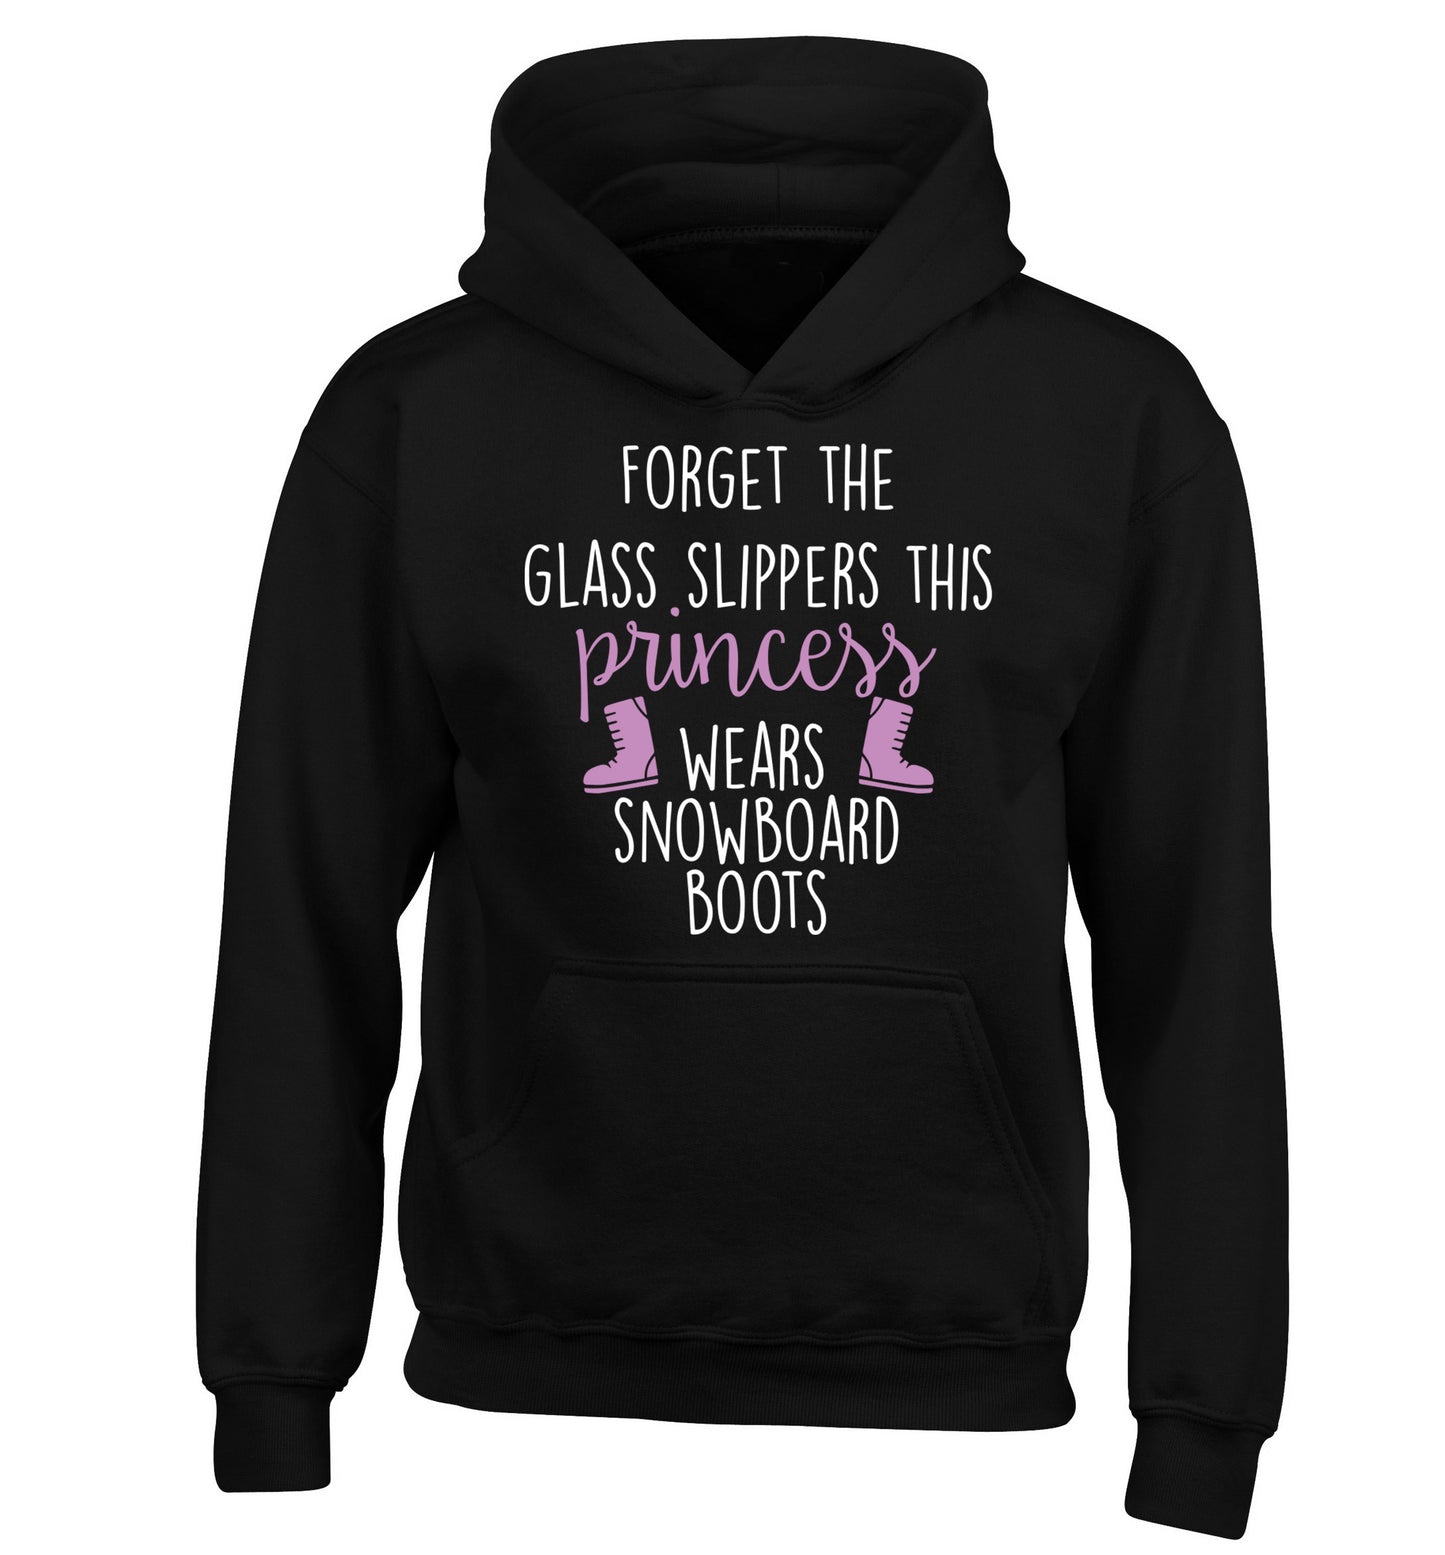 Forget the glass slippers this princess wears snowboard boots children's black hoodie 12-14 Years